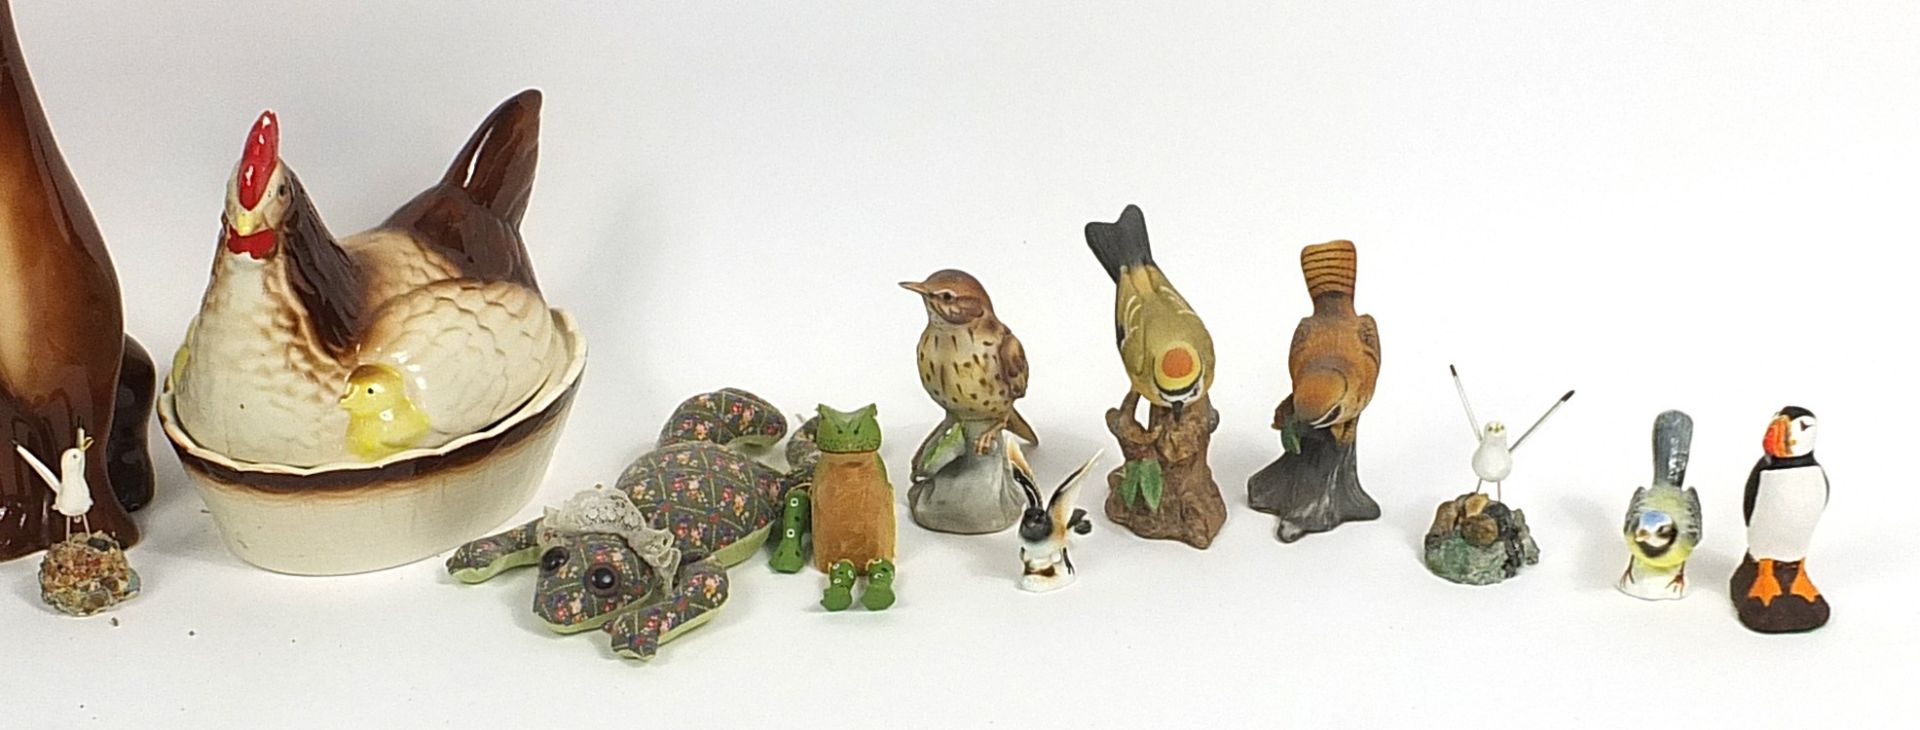 Collectable china and pottery animals including Jema style dogs, chicken egg basket and birds, the - Image 3 of 3